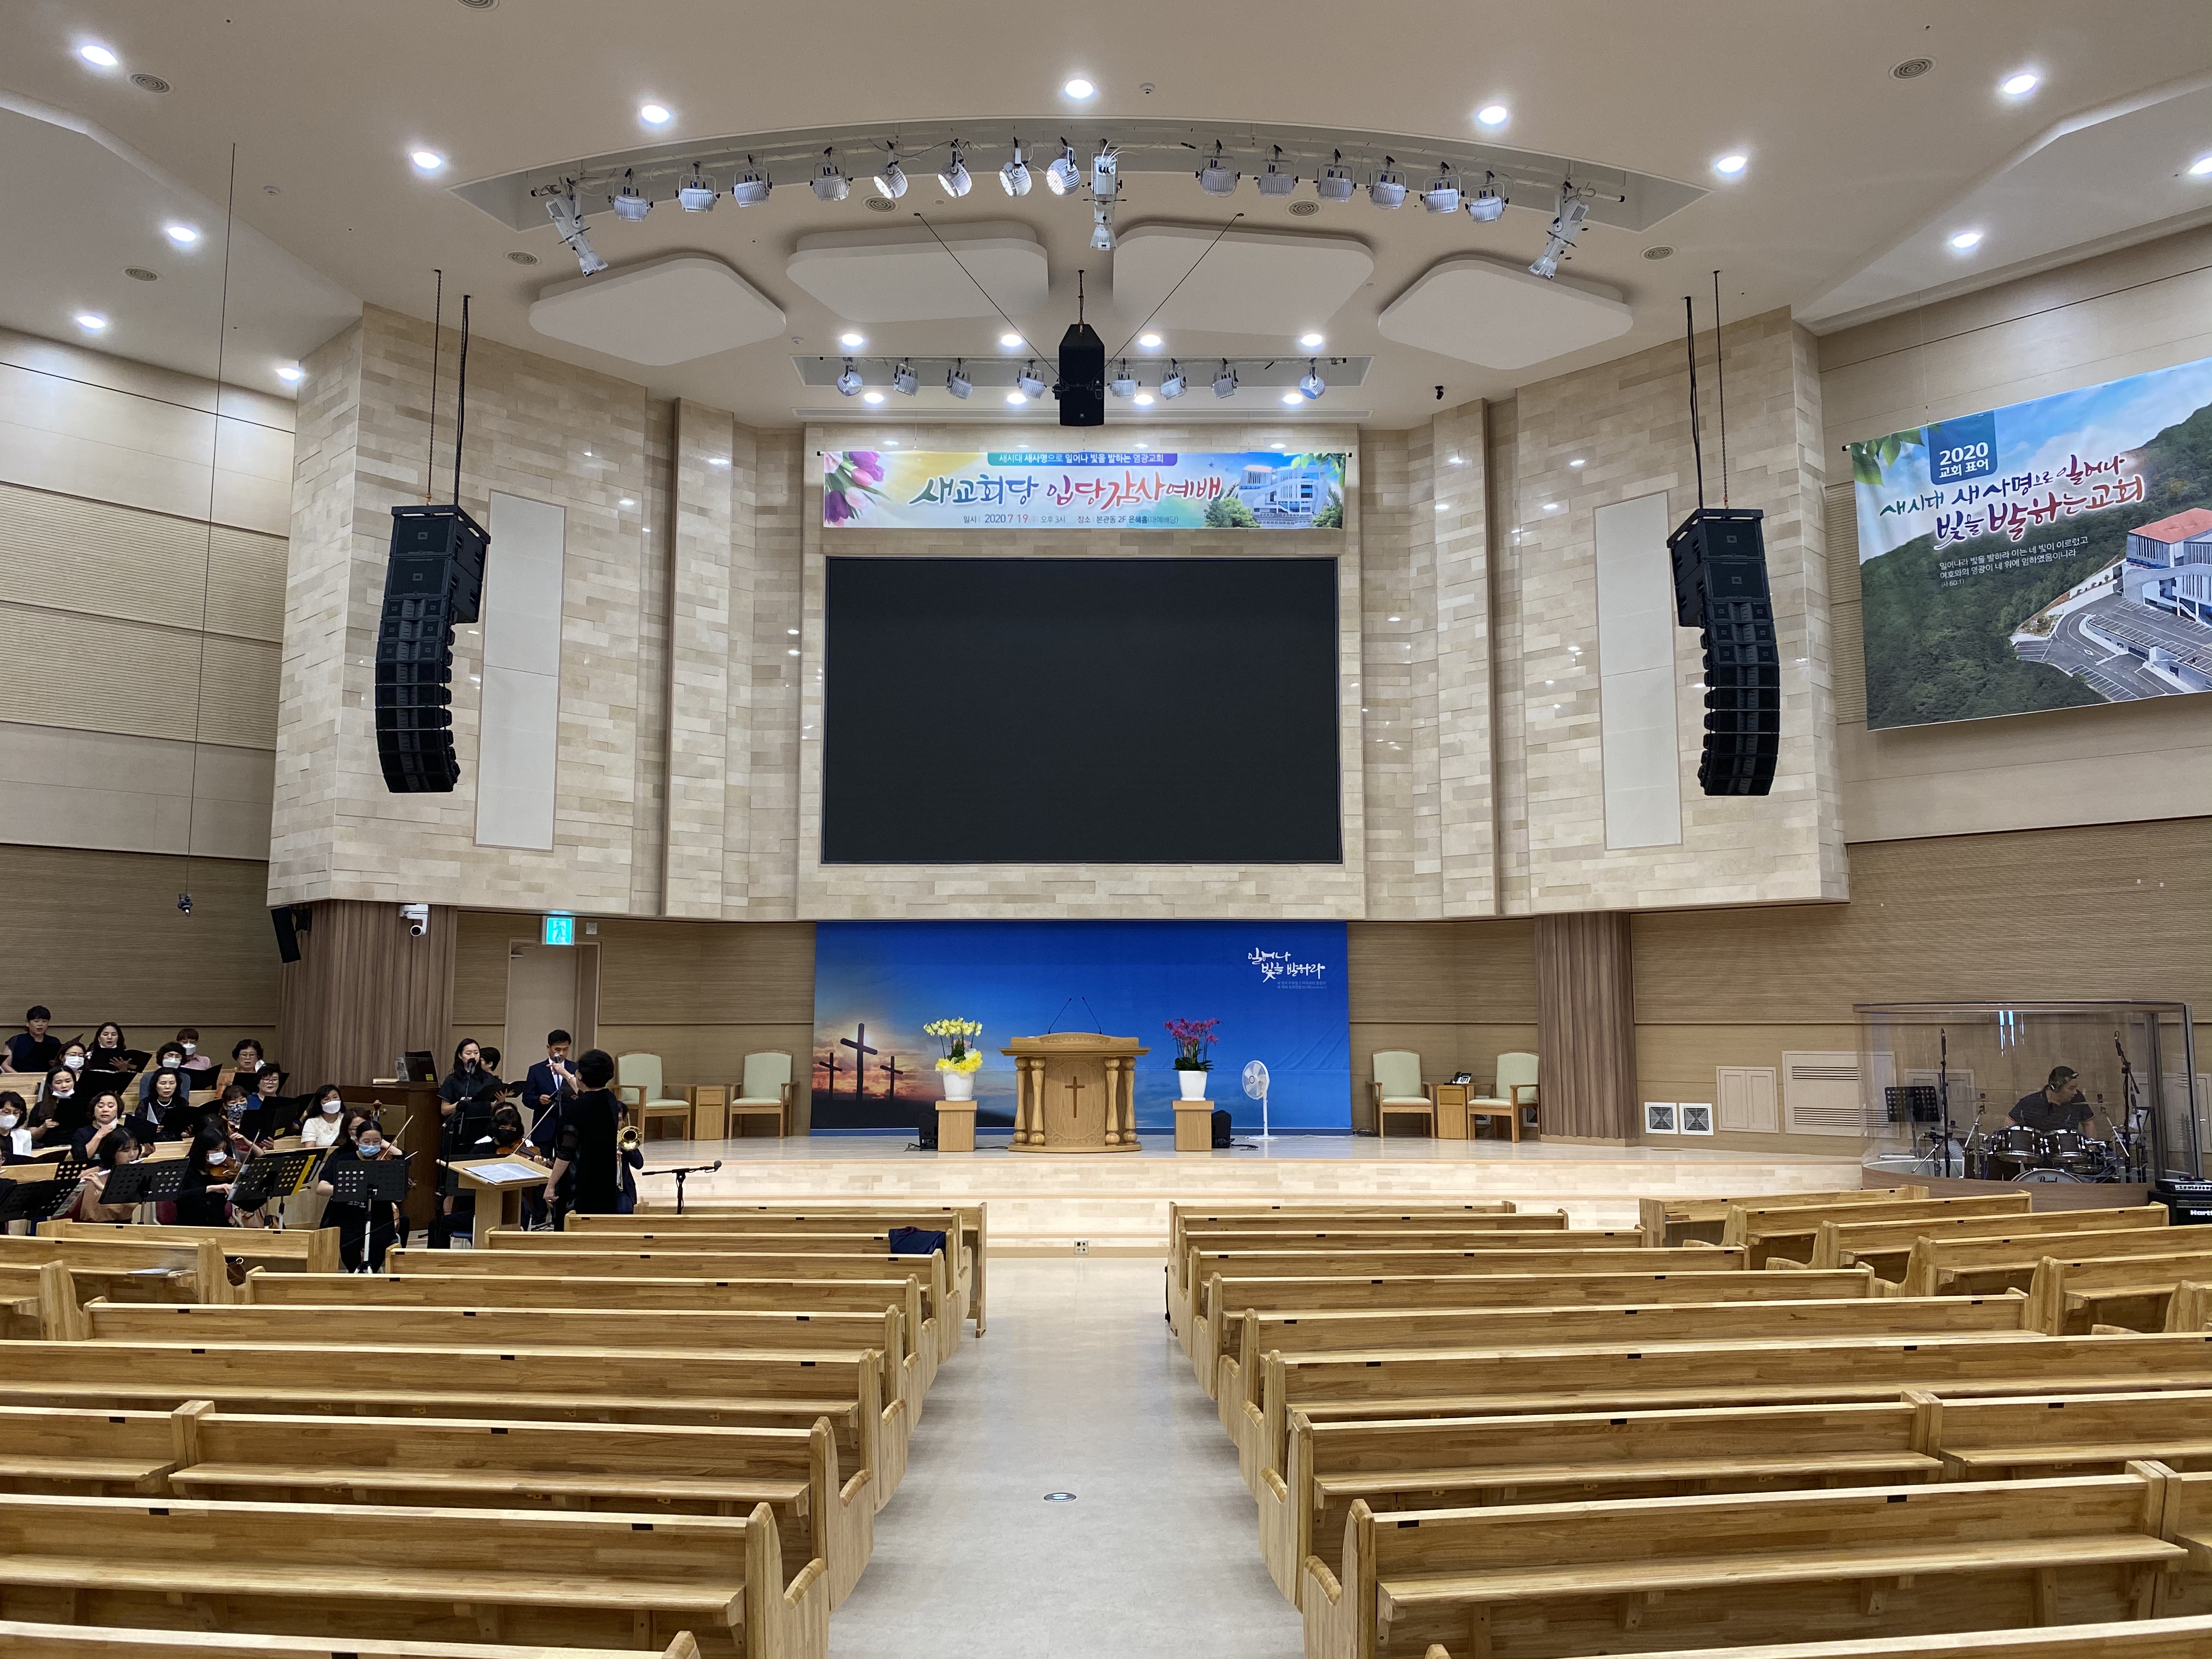 Yeomkwang Church Enhances the Worship Experience With a Complete HARMAN Professional Solutions Audio System